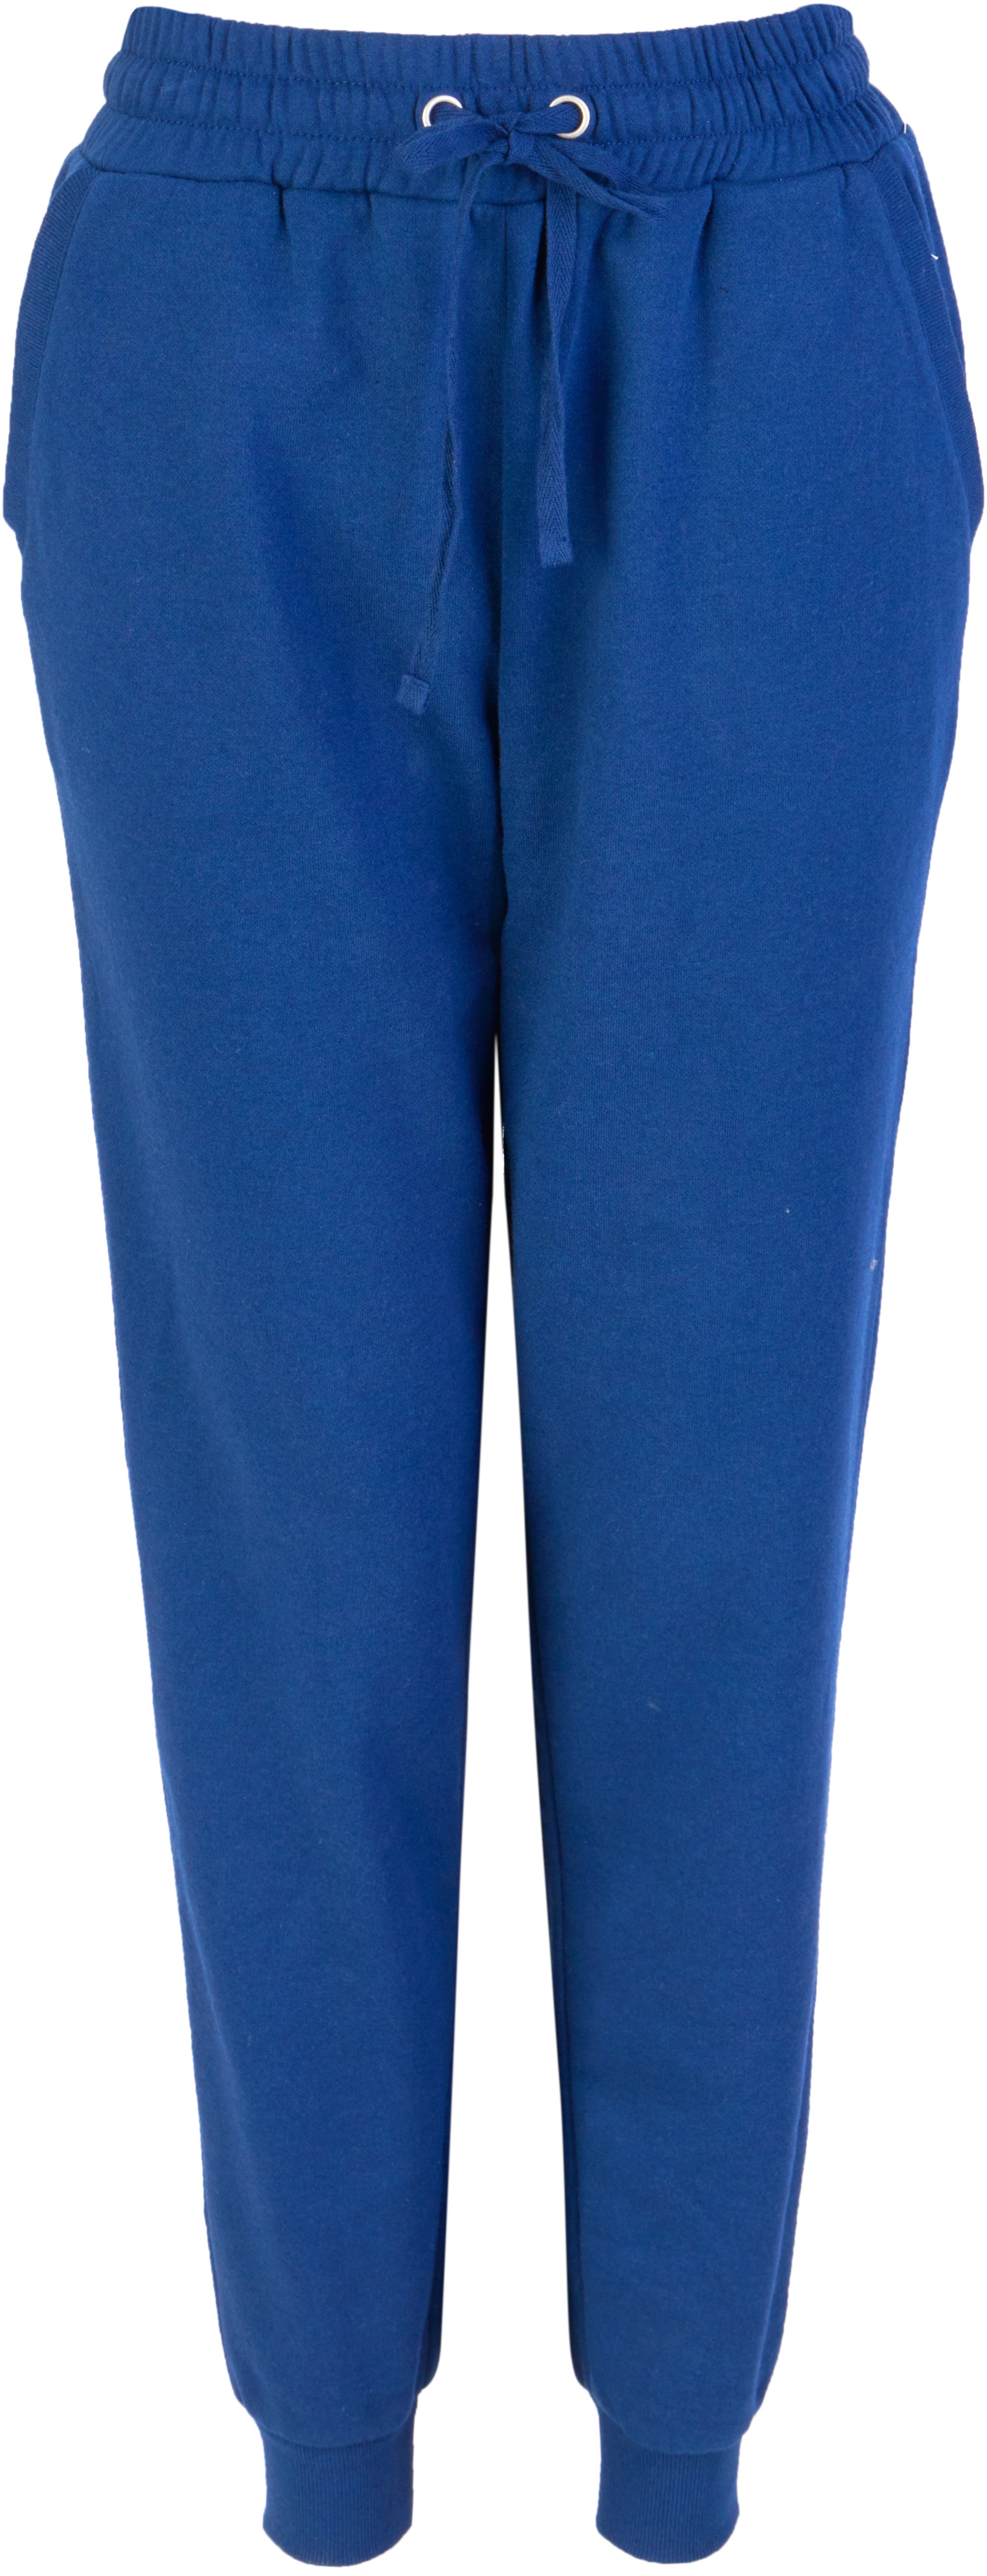 Jockey Womens Workout Pant, Color: Dark Navy - JCPenney